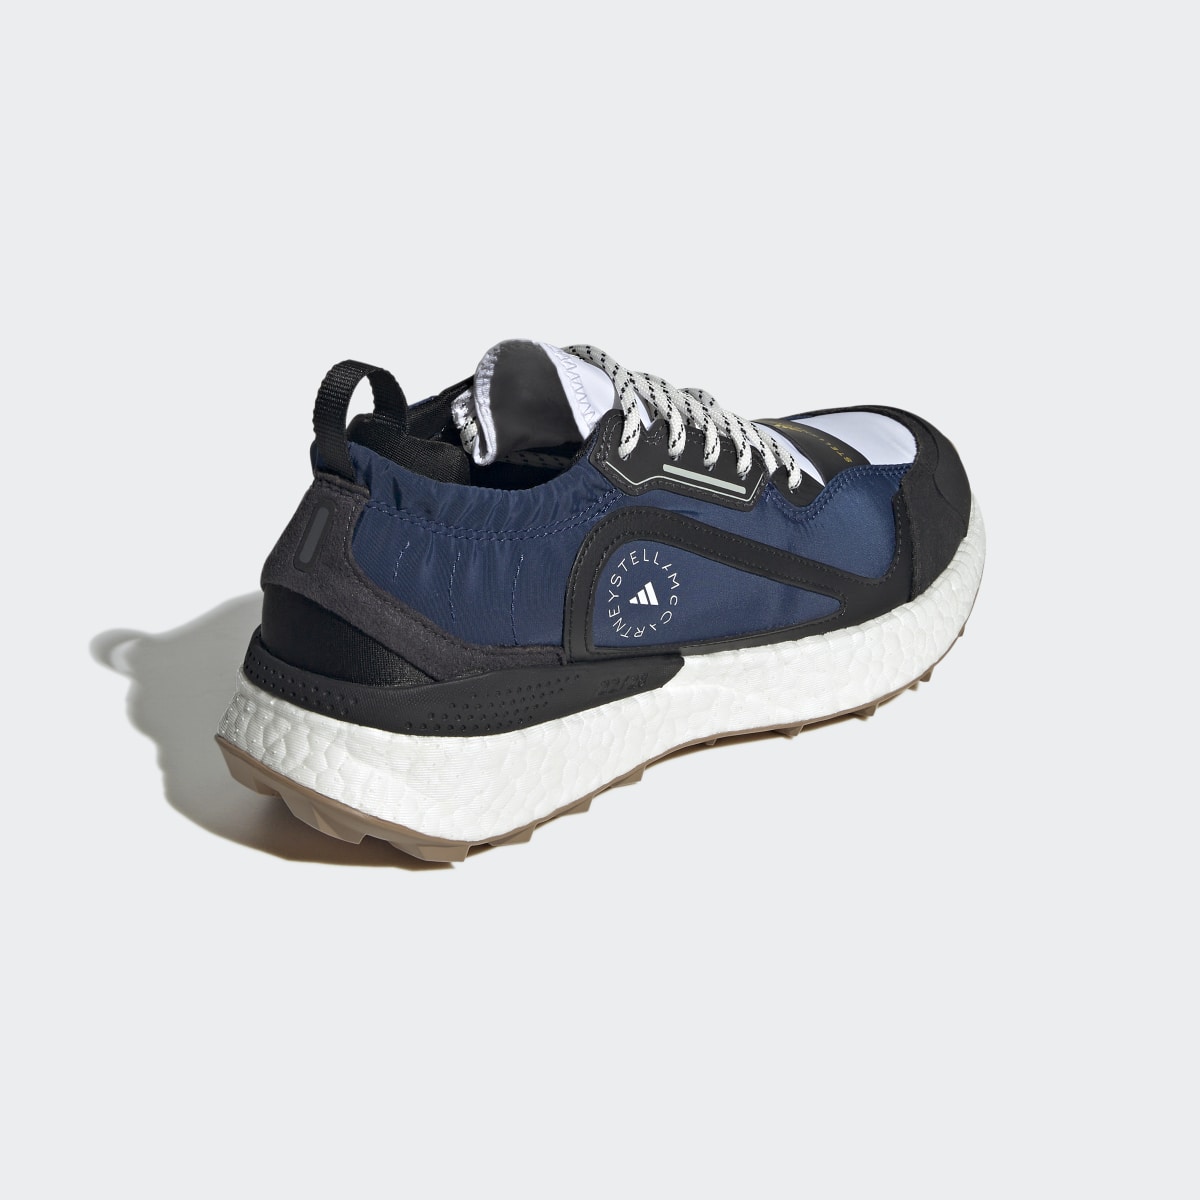 Adidas Chaussure adidas by Stella McCartney Outdoorboost 2.0 COLD.RDY. 6